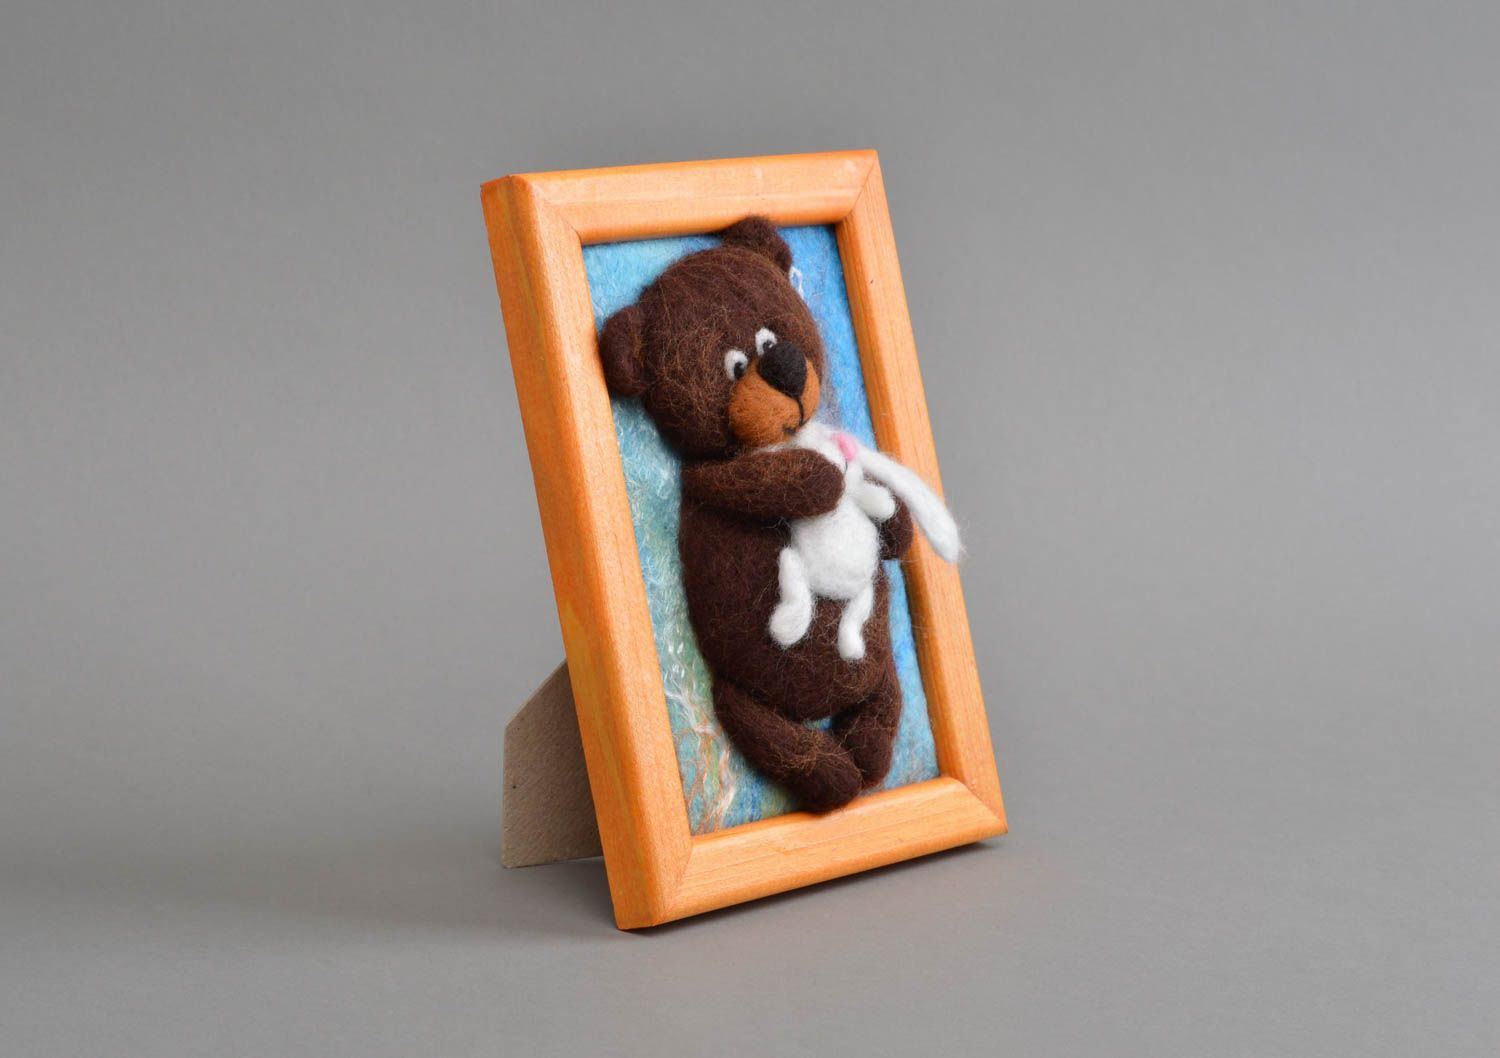 Handmade picture in frame nursery decor table decor woolen toy for children photo 2